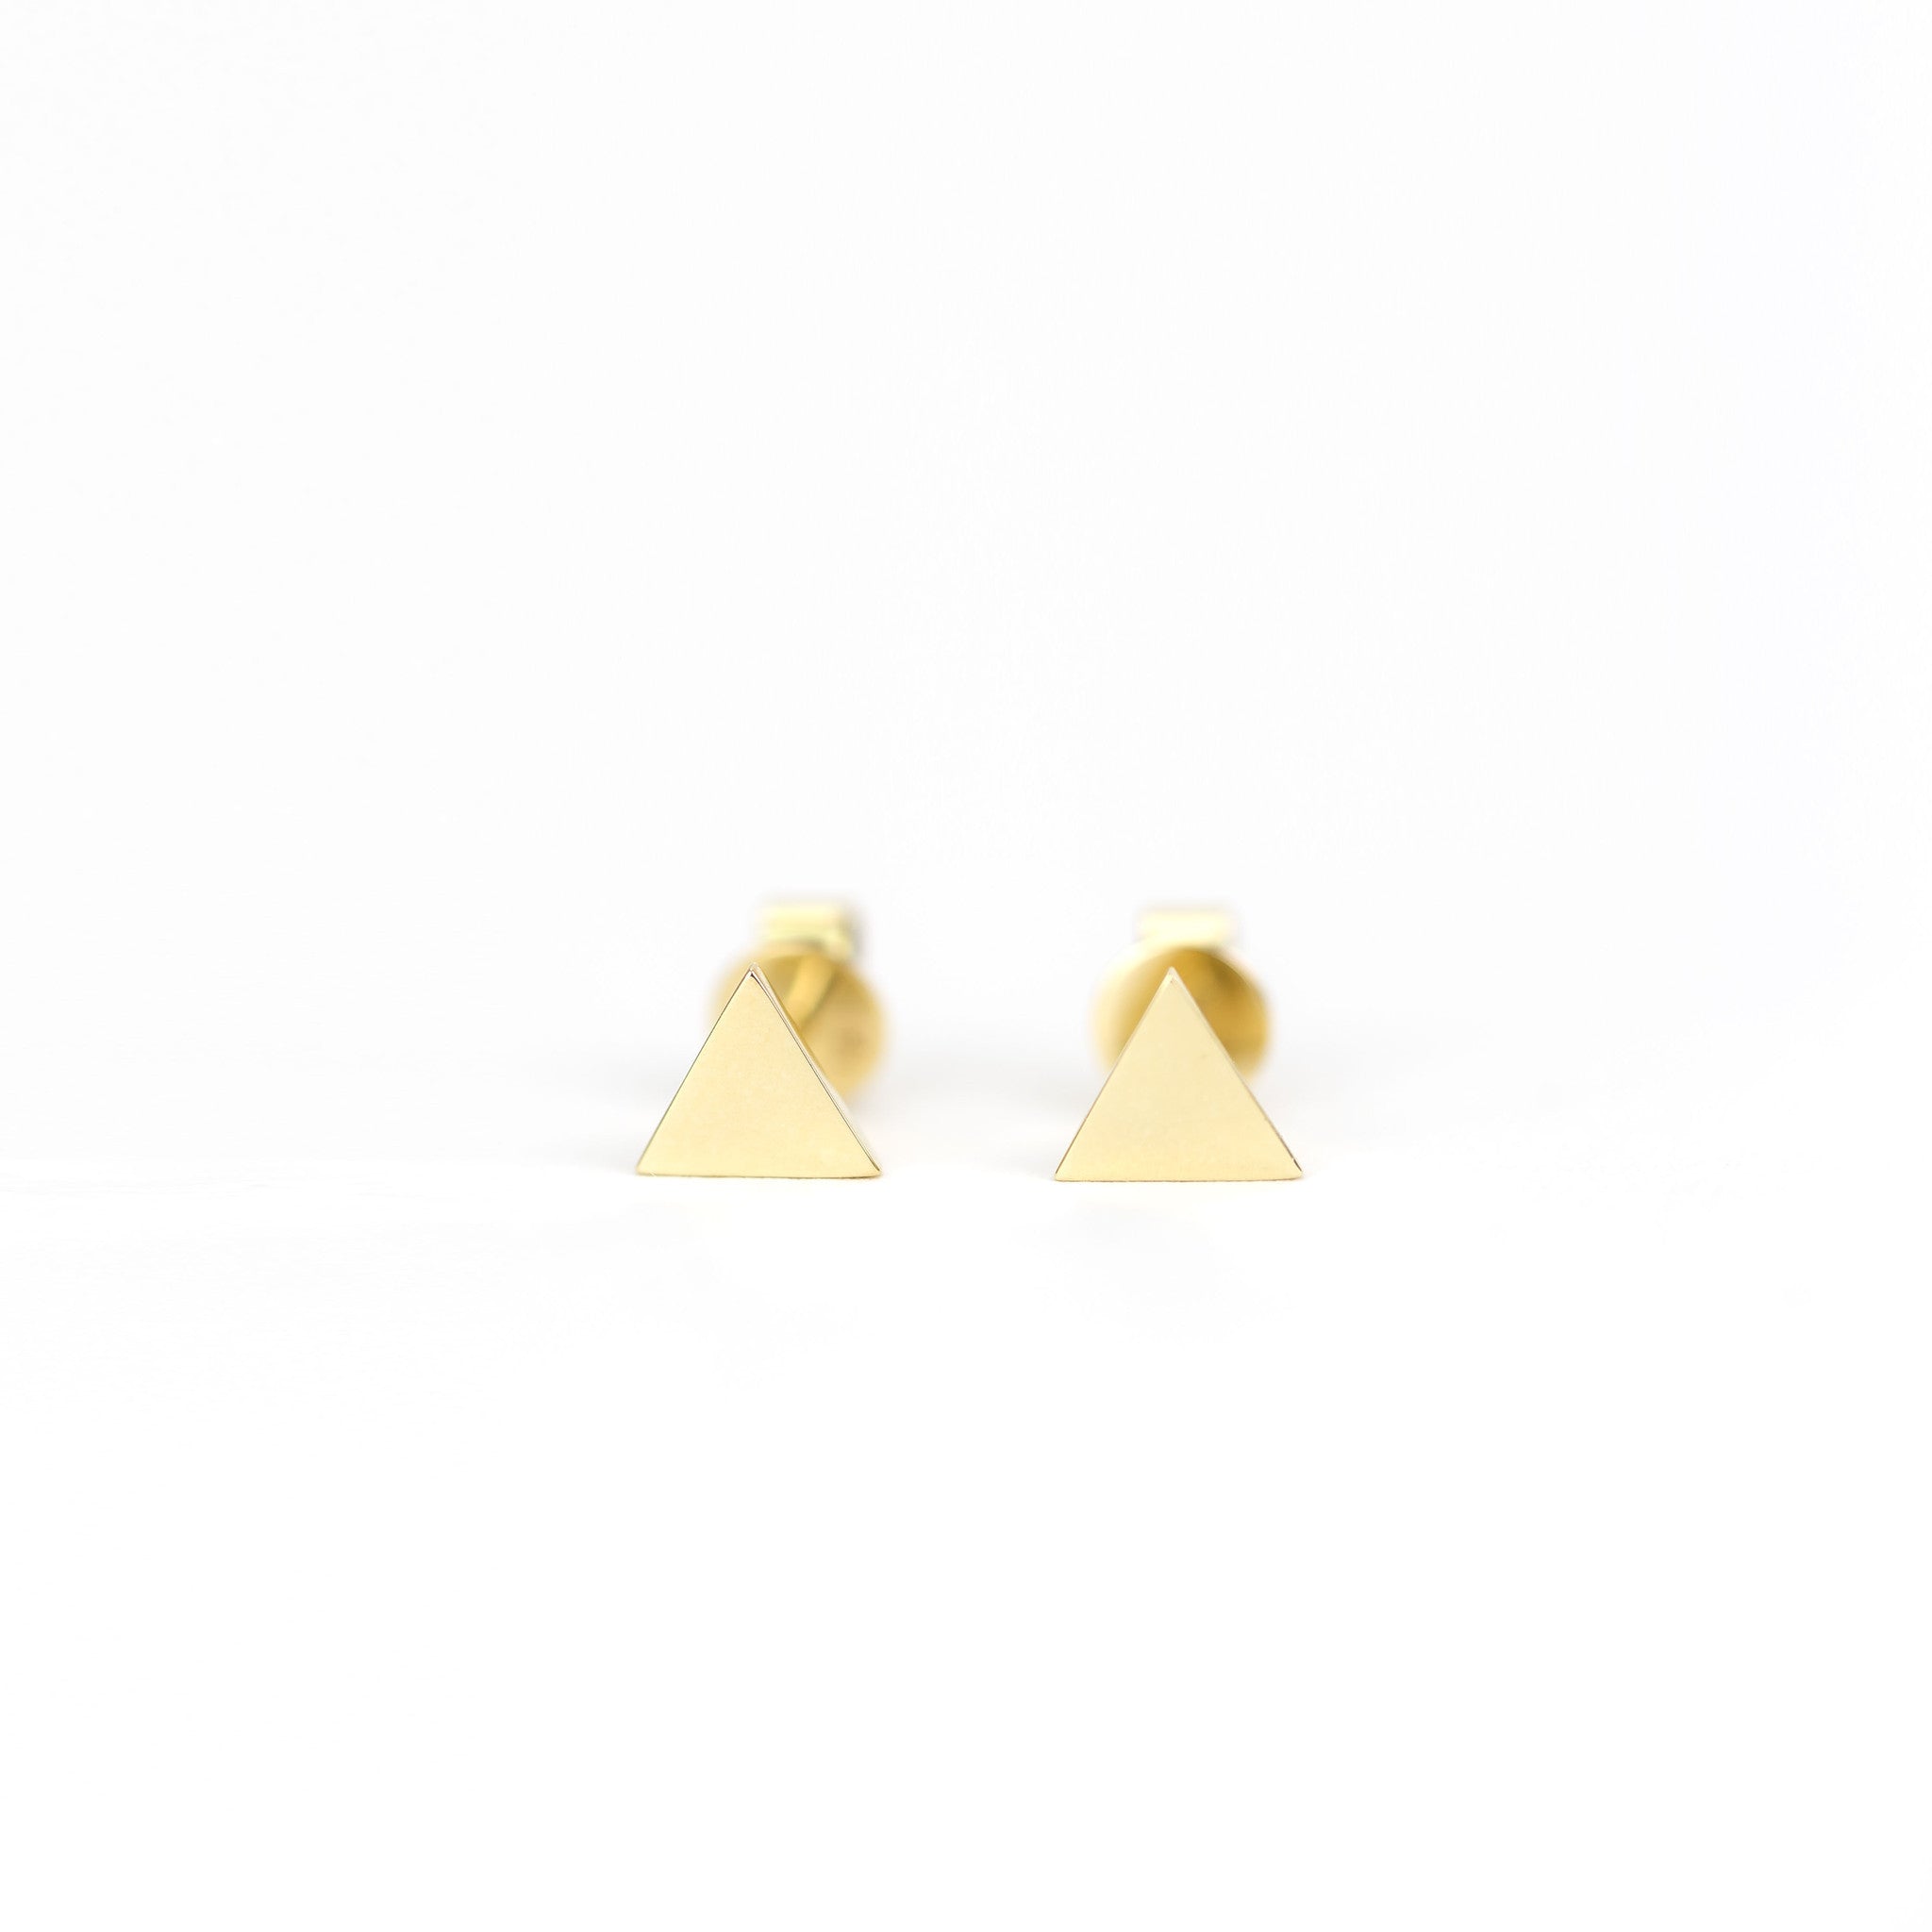 Golden Triangle Earrings by Atheria Jewelry